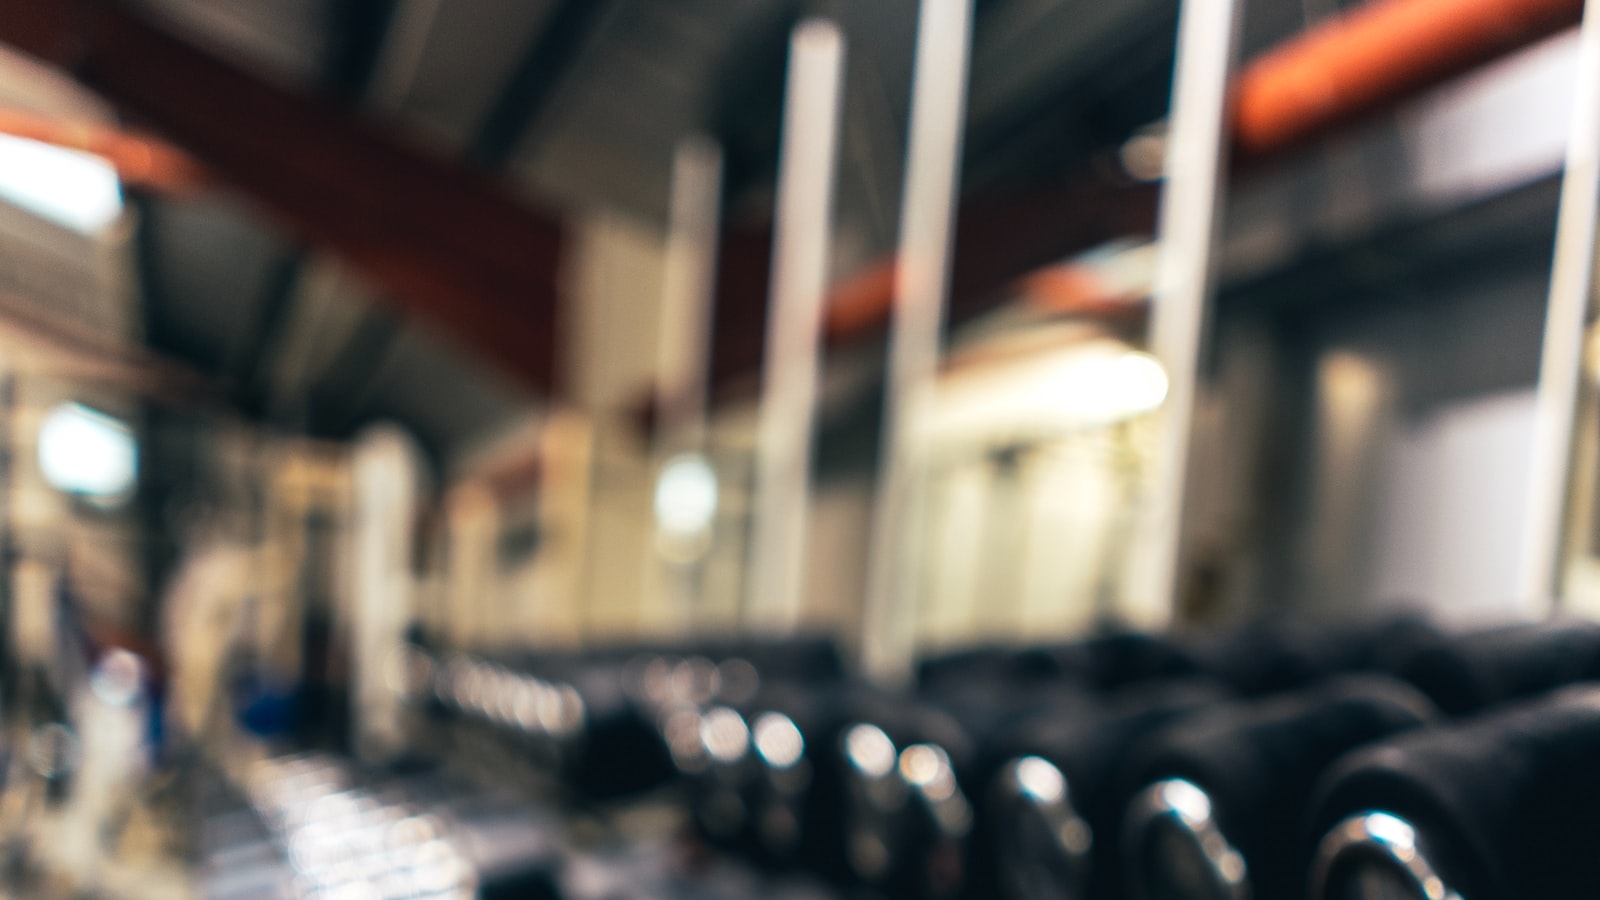 1. Pimpin' Out Your Swole: Gym Supplements Brand Guide